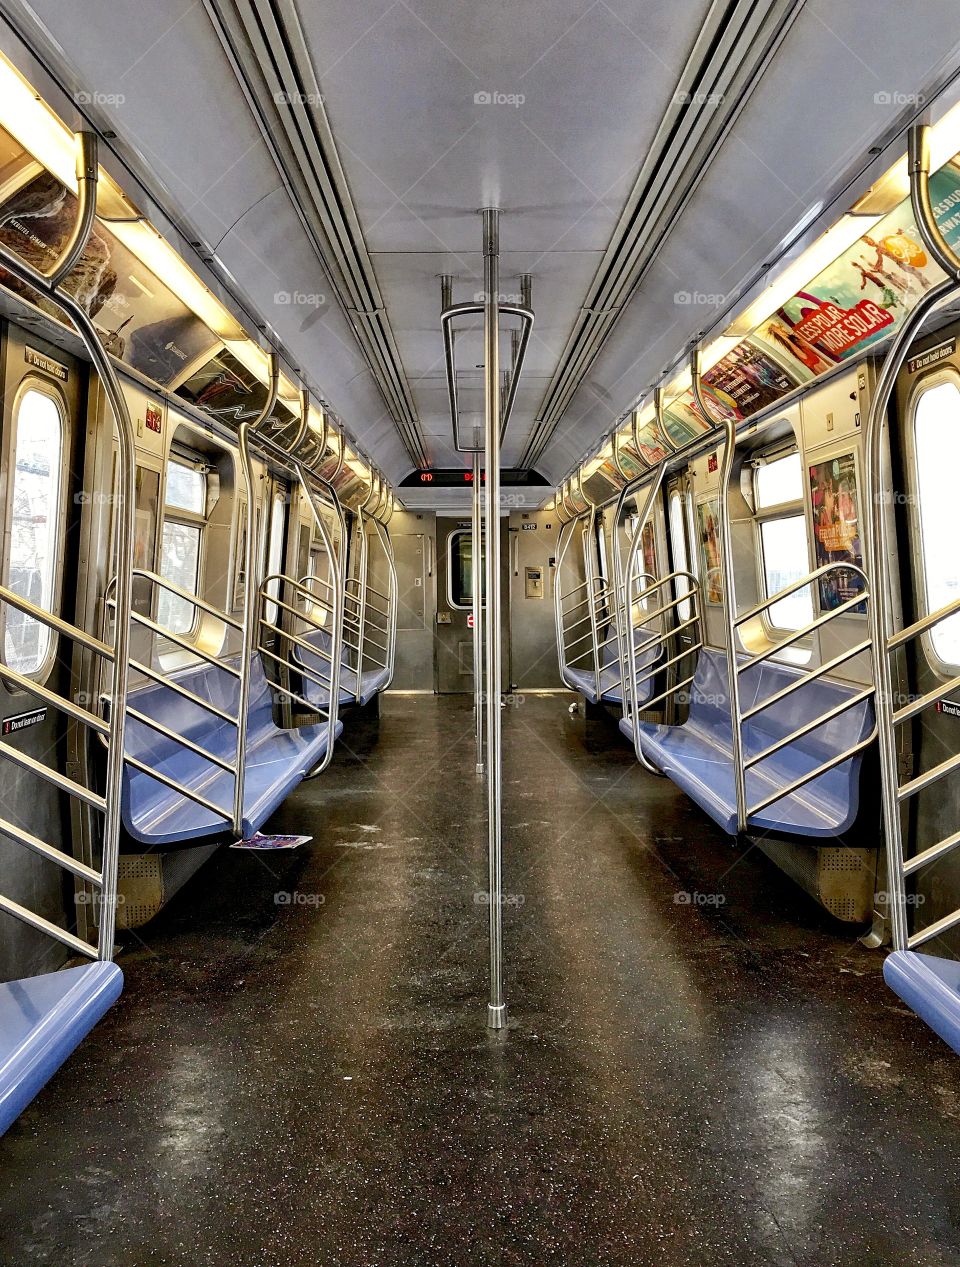 The Last Stop on the M Train, Queens, New York